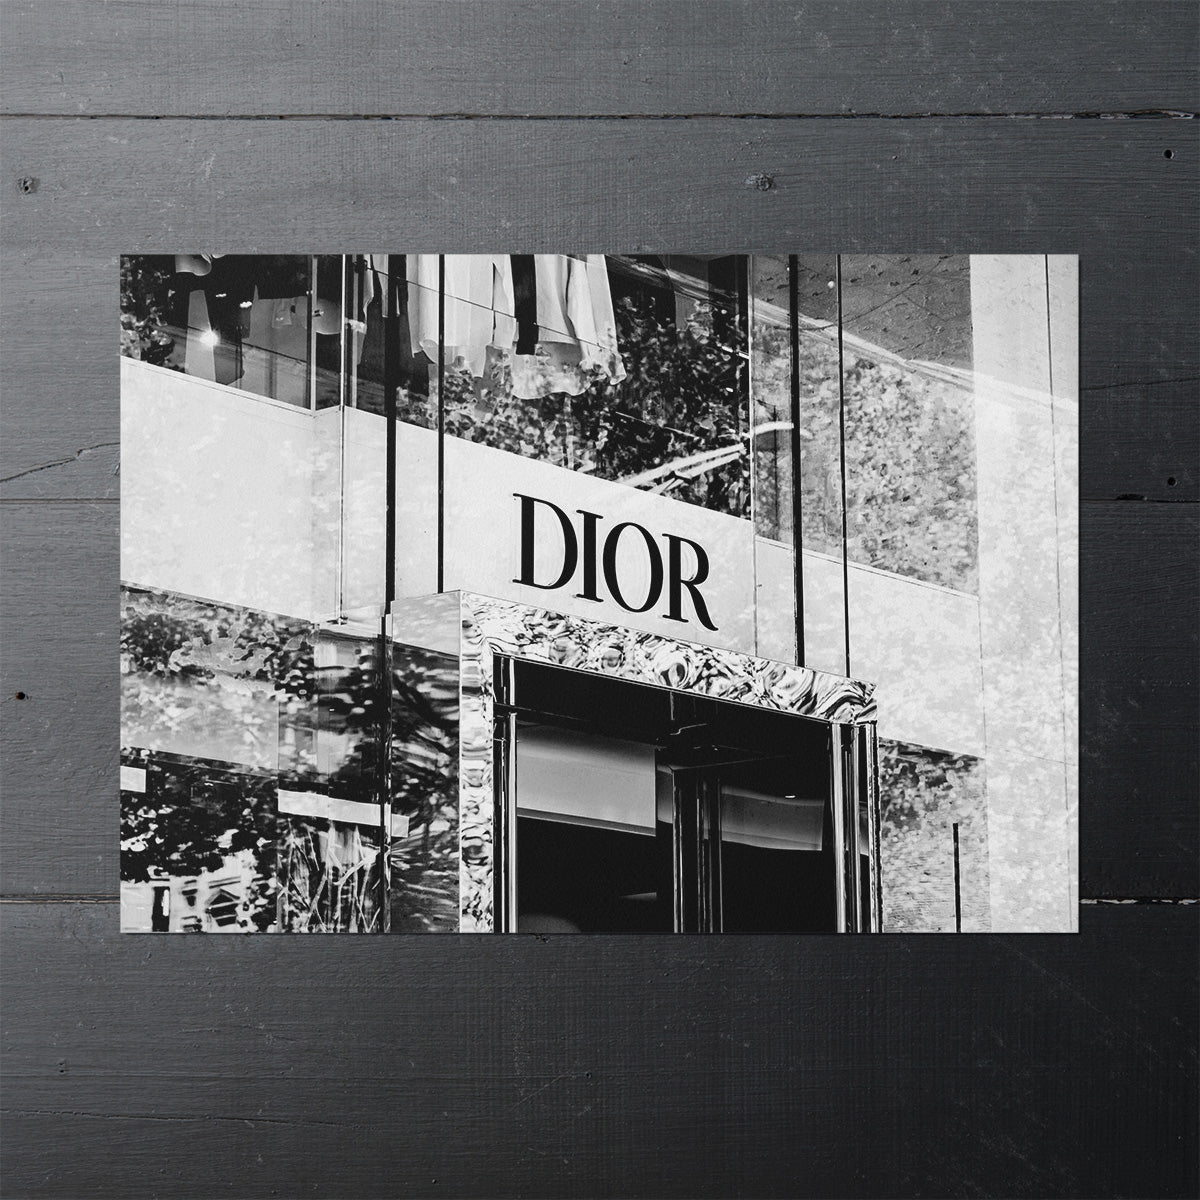  Dior Building Black and White Poster, Fashion Wall Art 16 x 20:  Posters & Prints